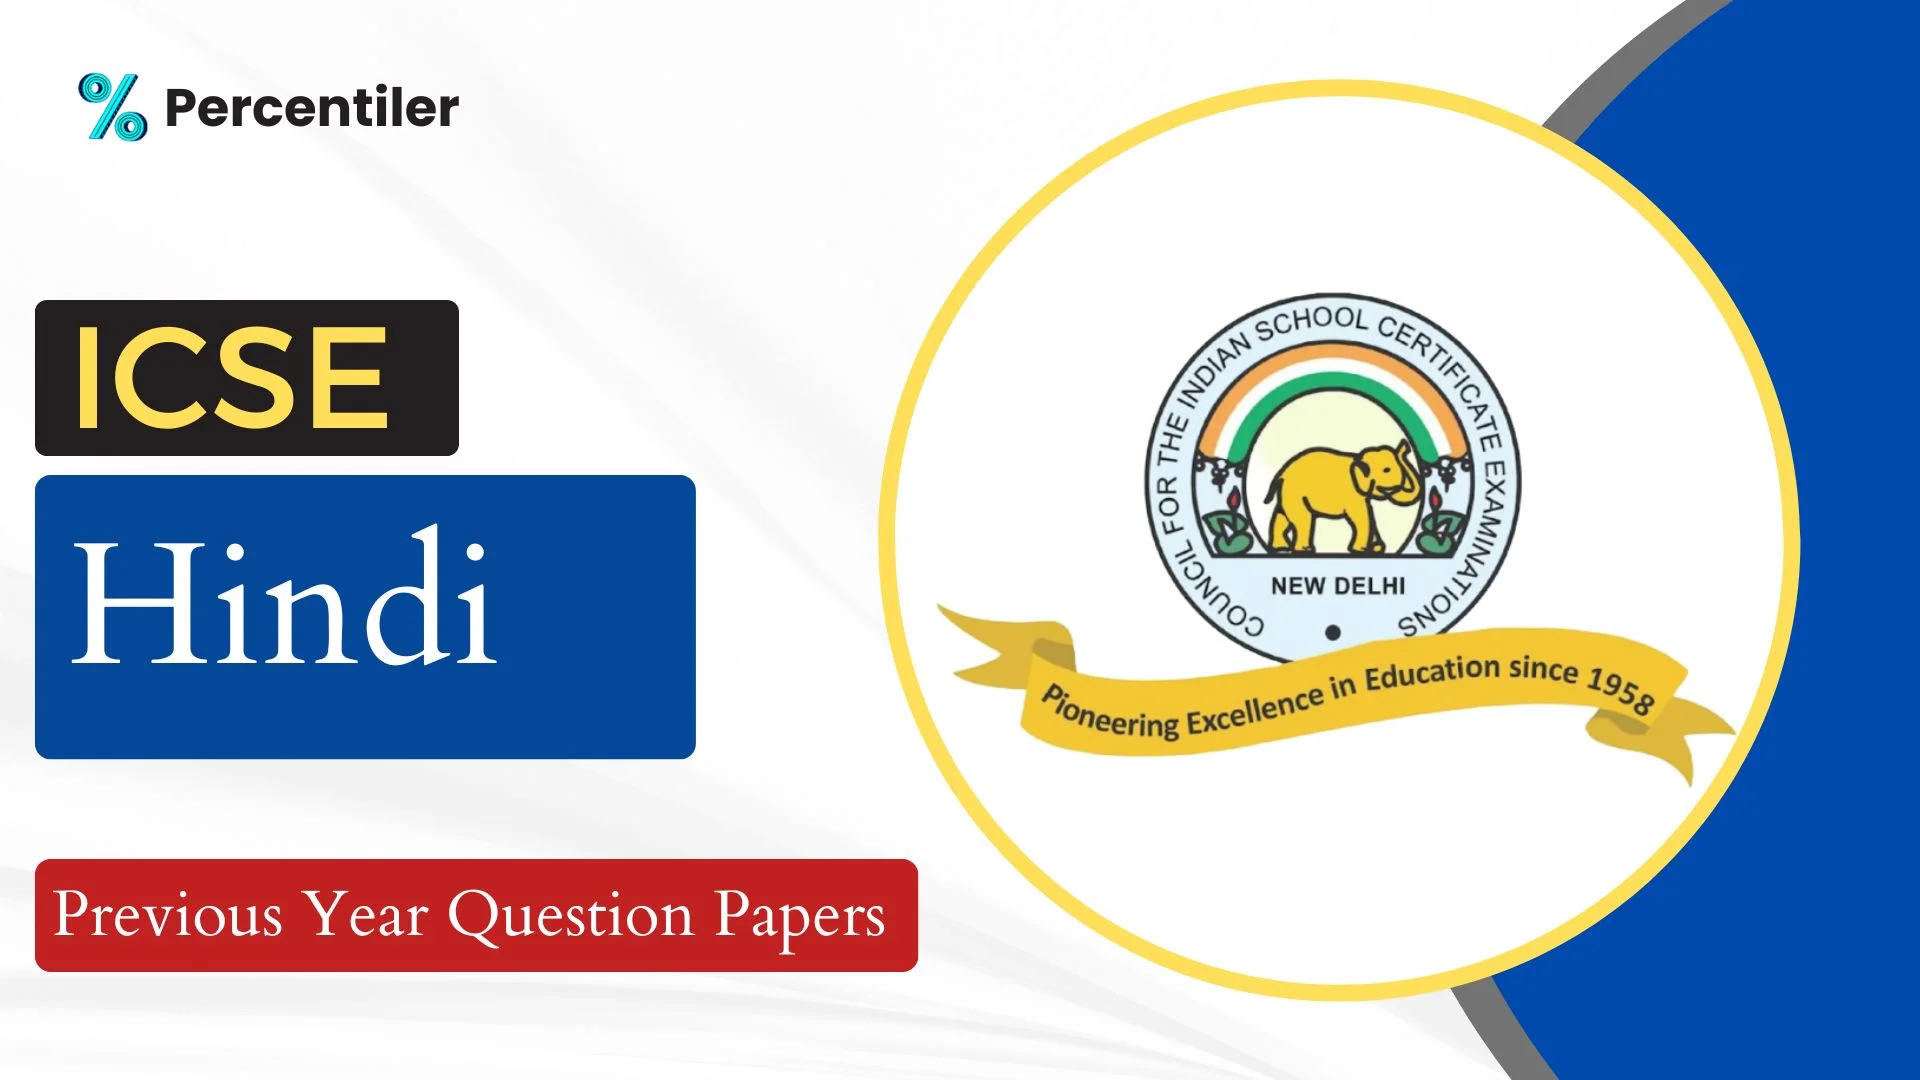 ICSE Hindi Previous Year Question Papers